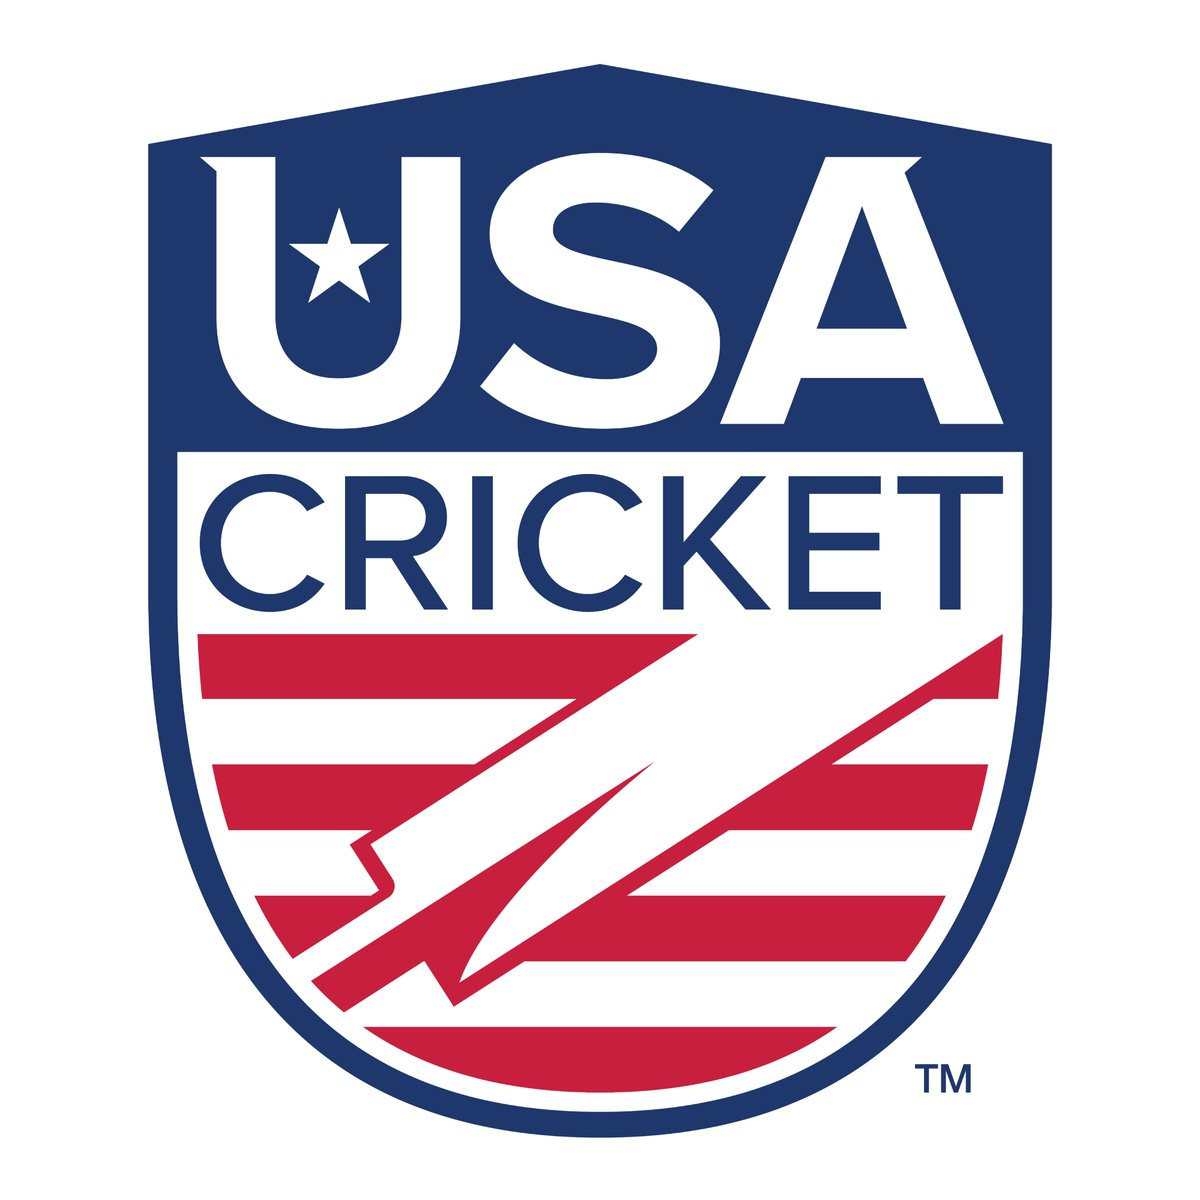 USA Cricket has officially been launched with branding and new social media accounts ©USA Cricket